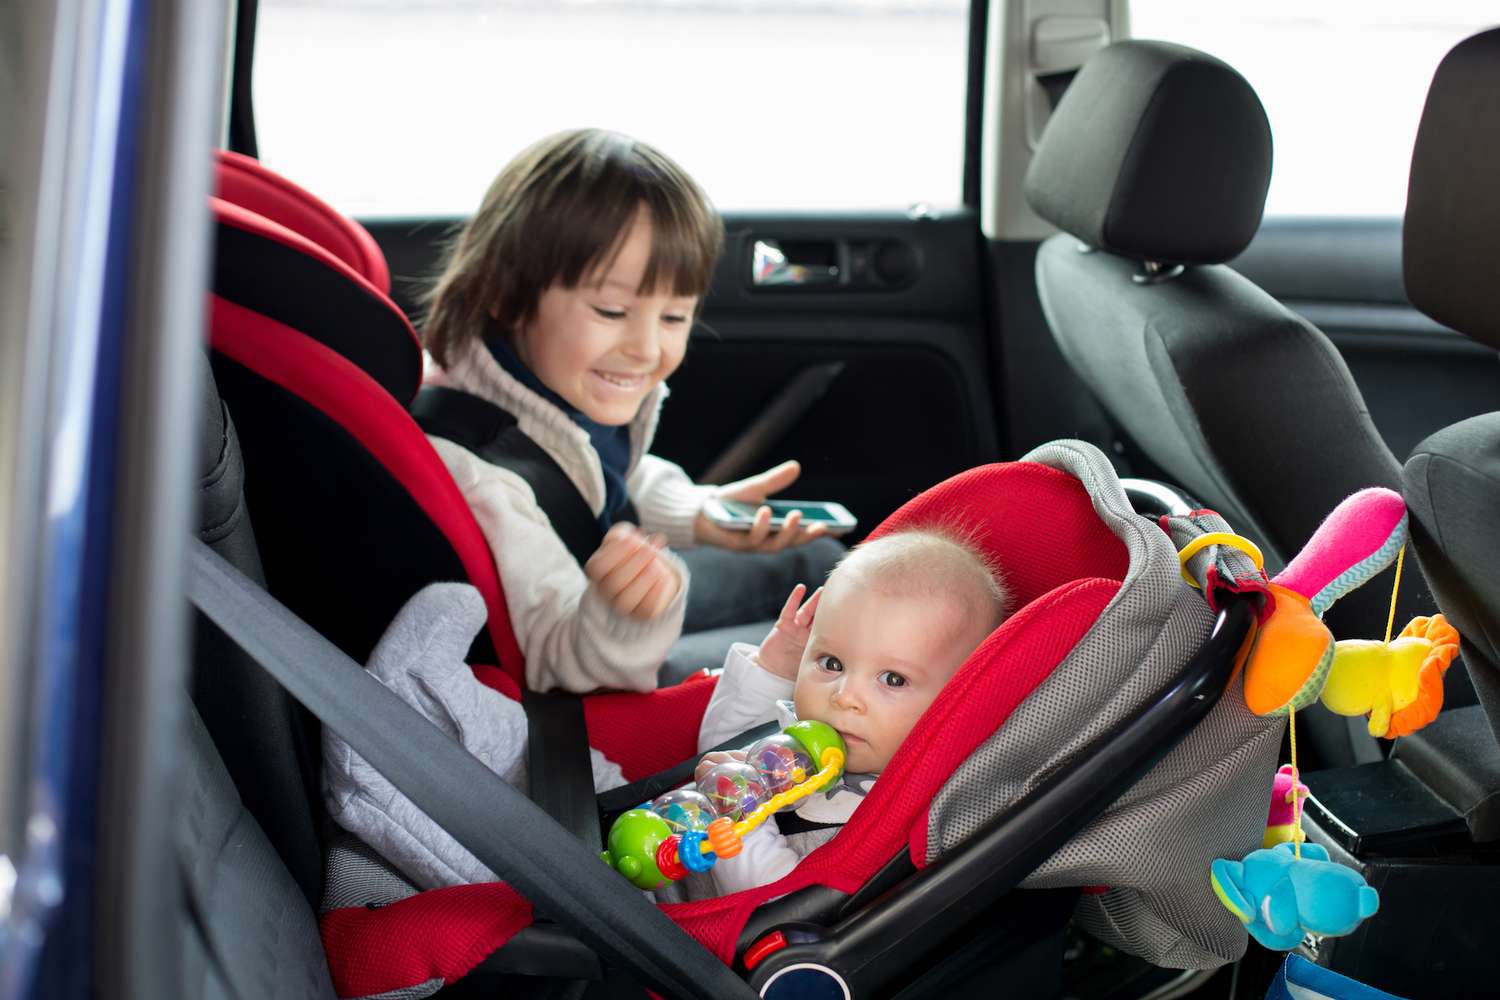 Car Seat For Your Child, What Type Of Car Seat Is Needed For A 4 Year Old